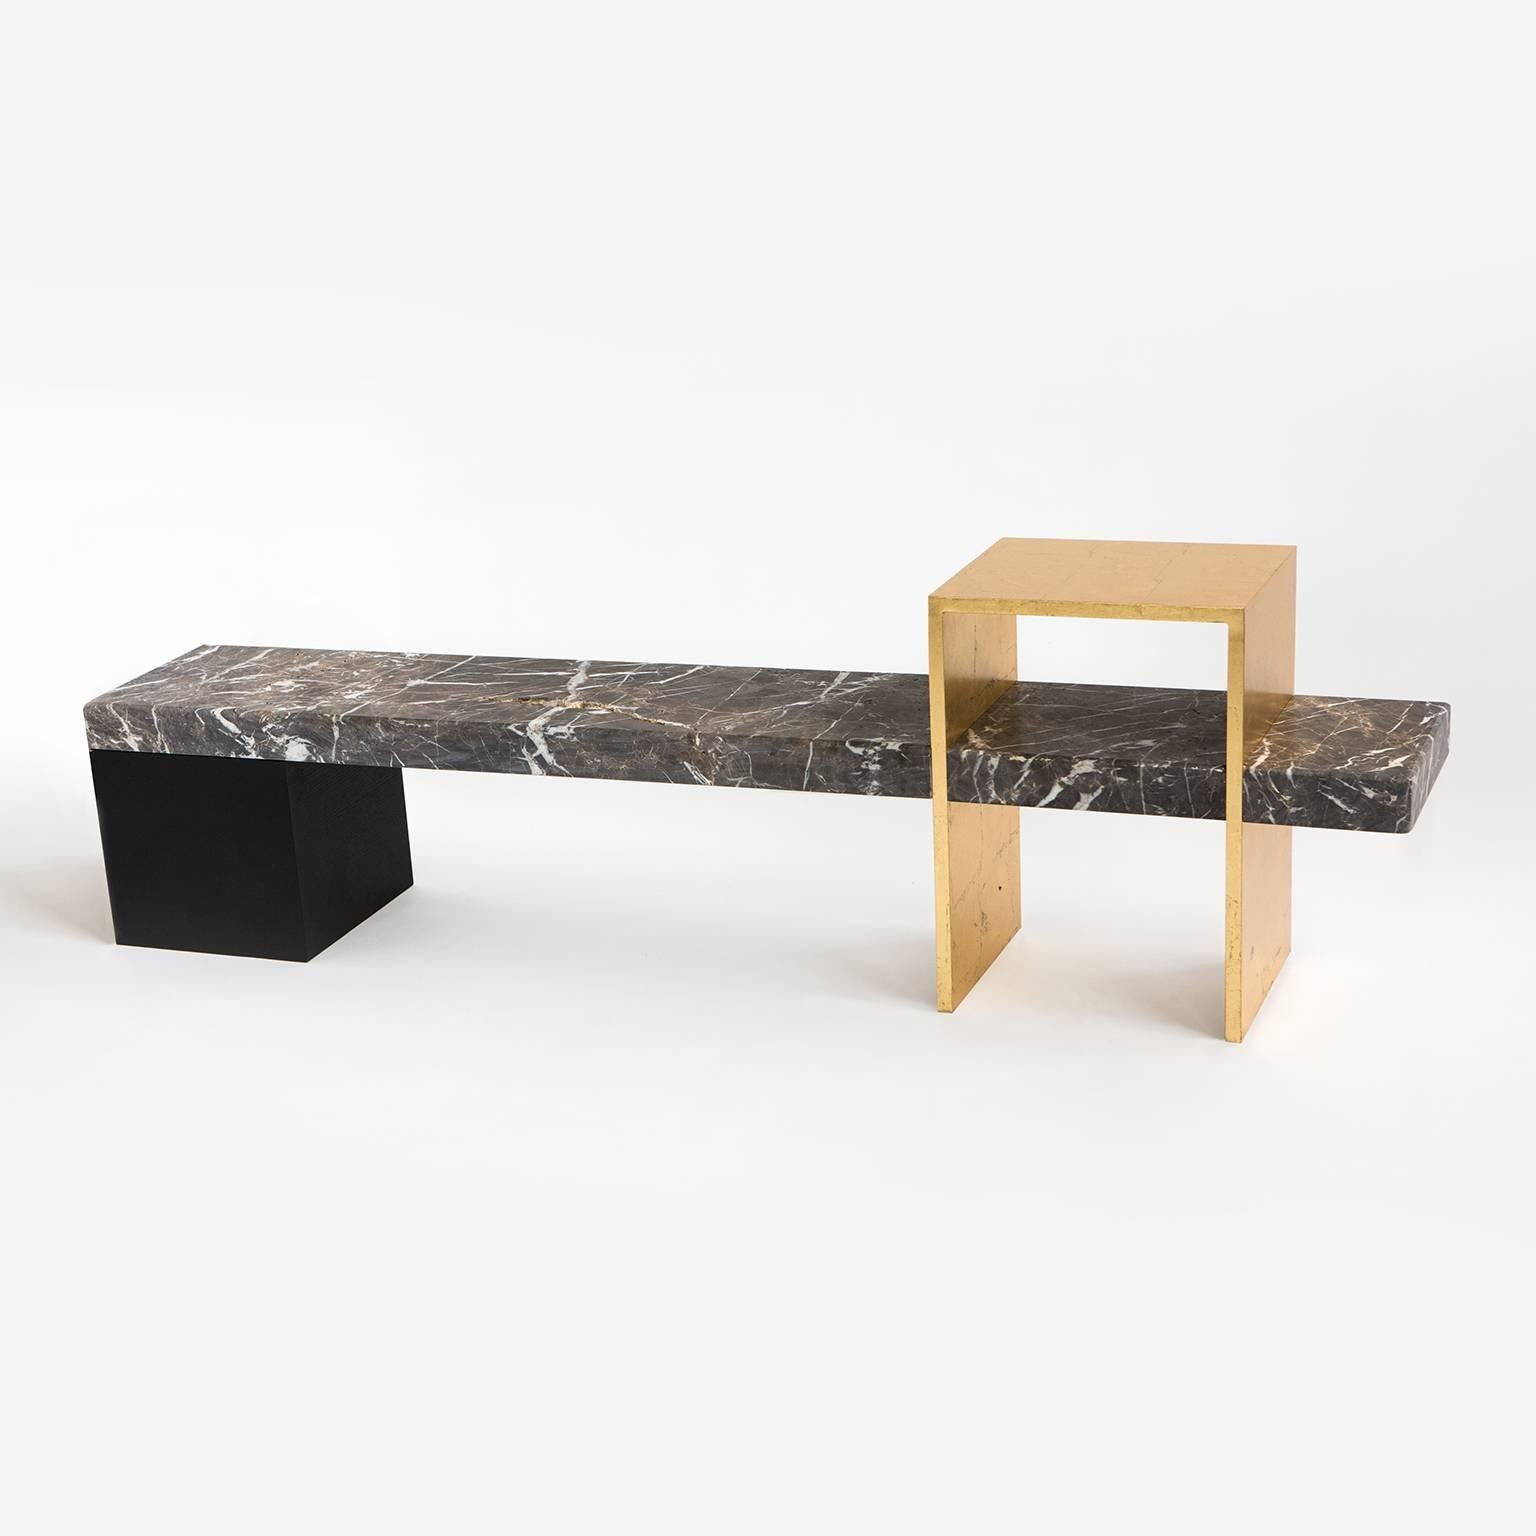 This unique bench and cocktail table is a part of the FOUND collection of one-of-a-kind functional art pieces. It features 2.75